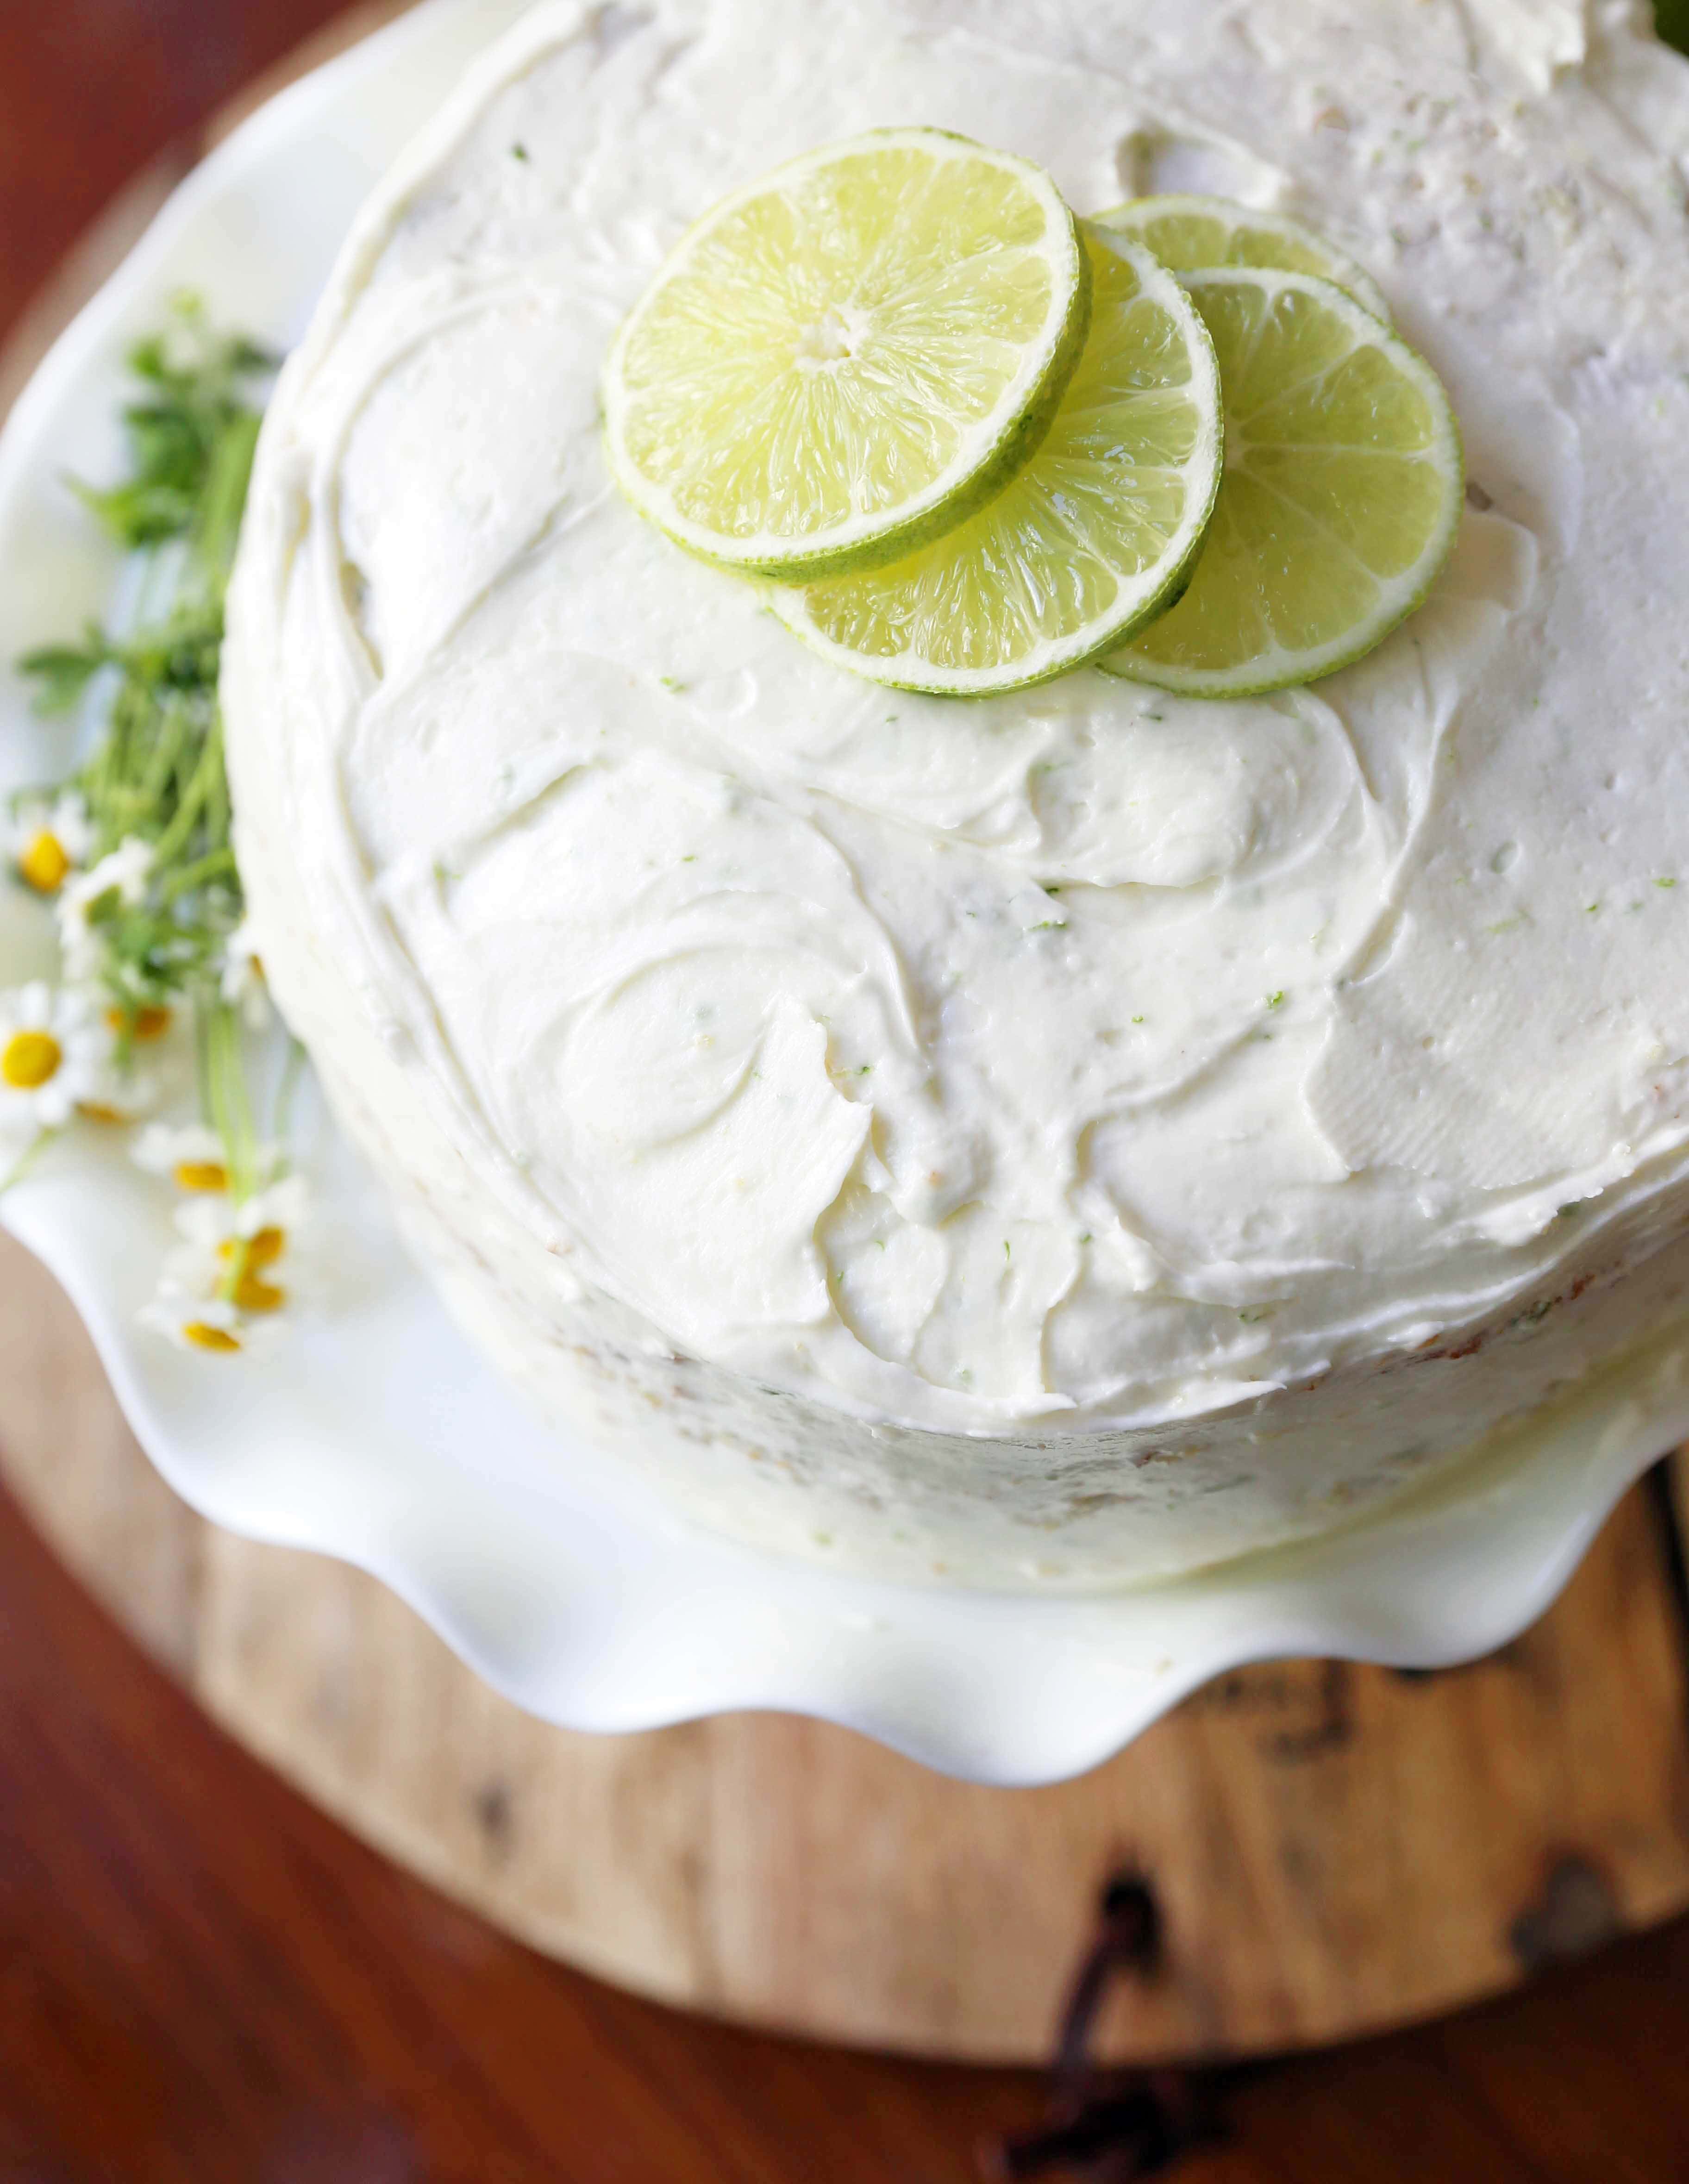 Key Lime Cake with Cream Cheese Frosting. Moist key lime cake with sweet cream cheese frosting. A light and fluffy citrus lime cake with the perfect lime buttercream frosting! The BEST Lime Cake Recipe! www.modernhoney.com #limecake #keylimecake #citruscake